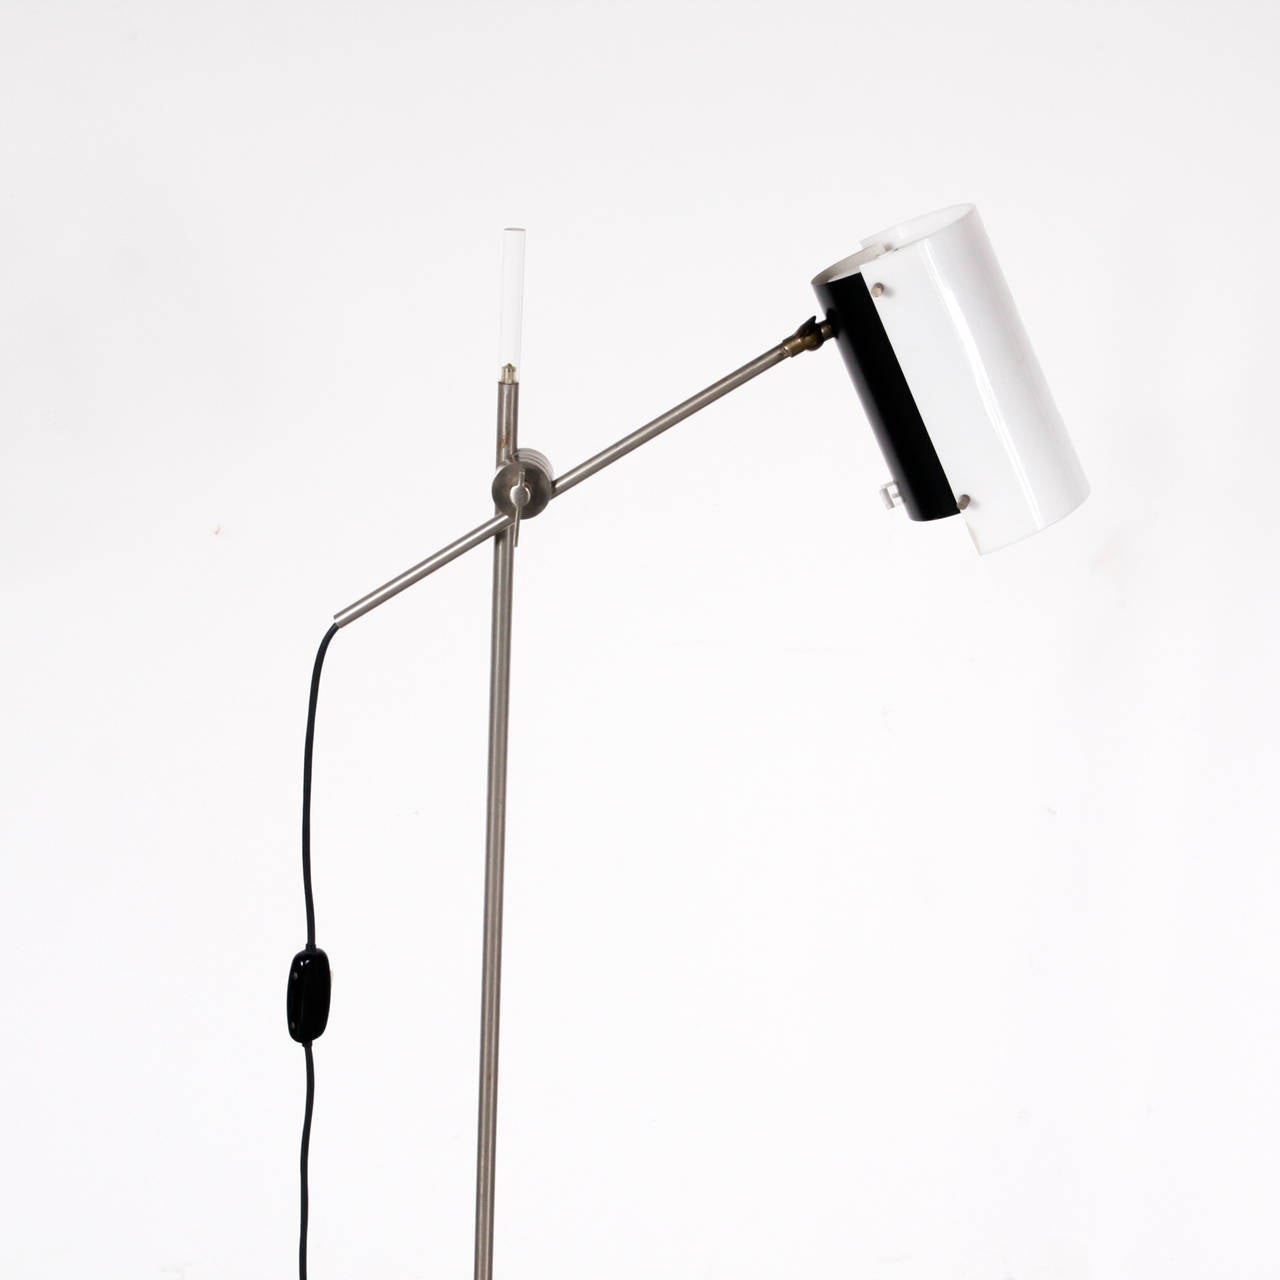 Sculptural floor lamp manufactured by Philips (The Netherlands), circa 1950.
Steel base and structure adjustable in height with a beautiful shade.
In great vintage condition.